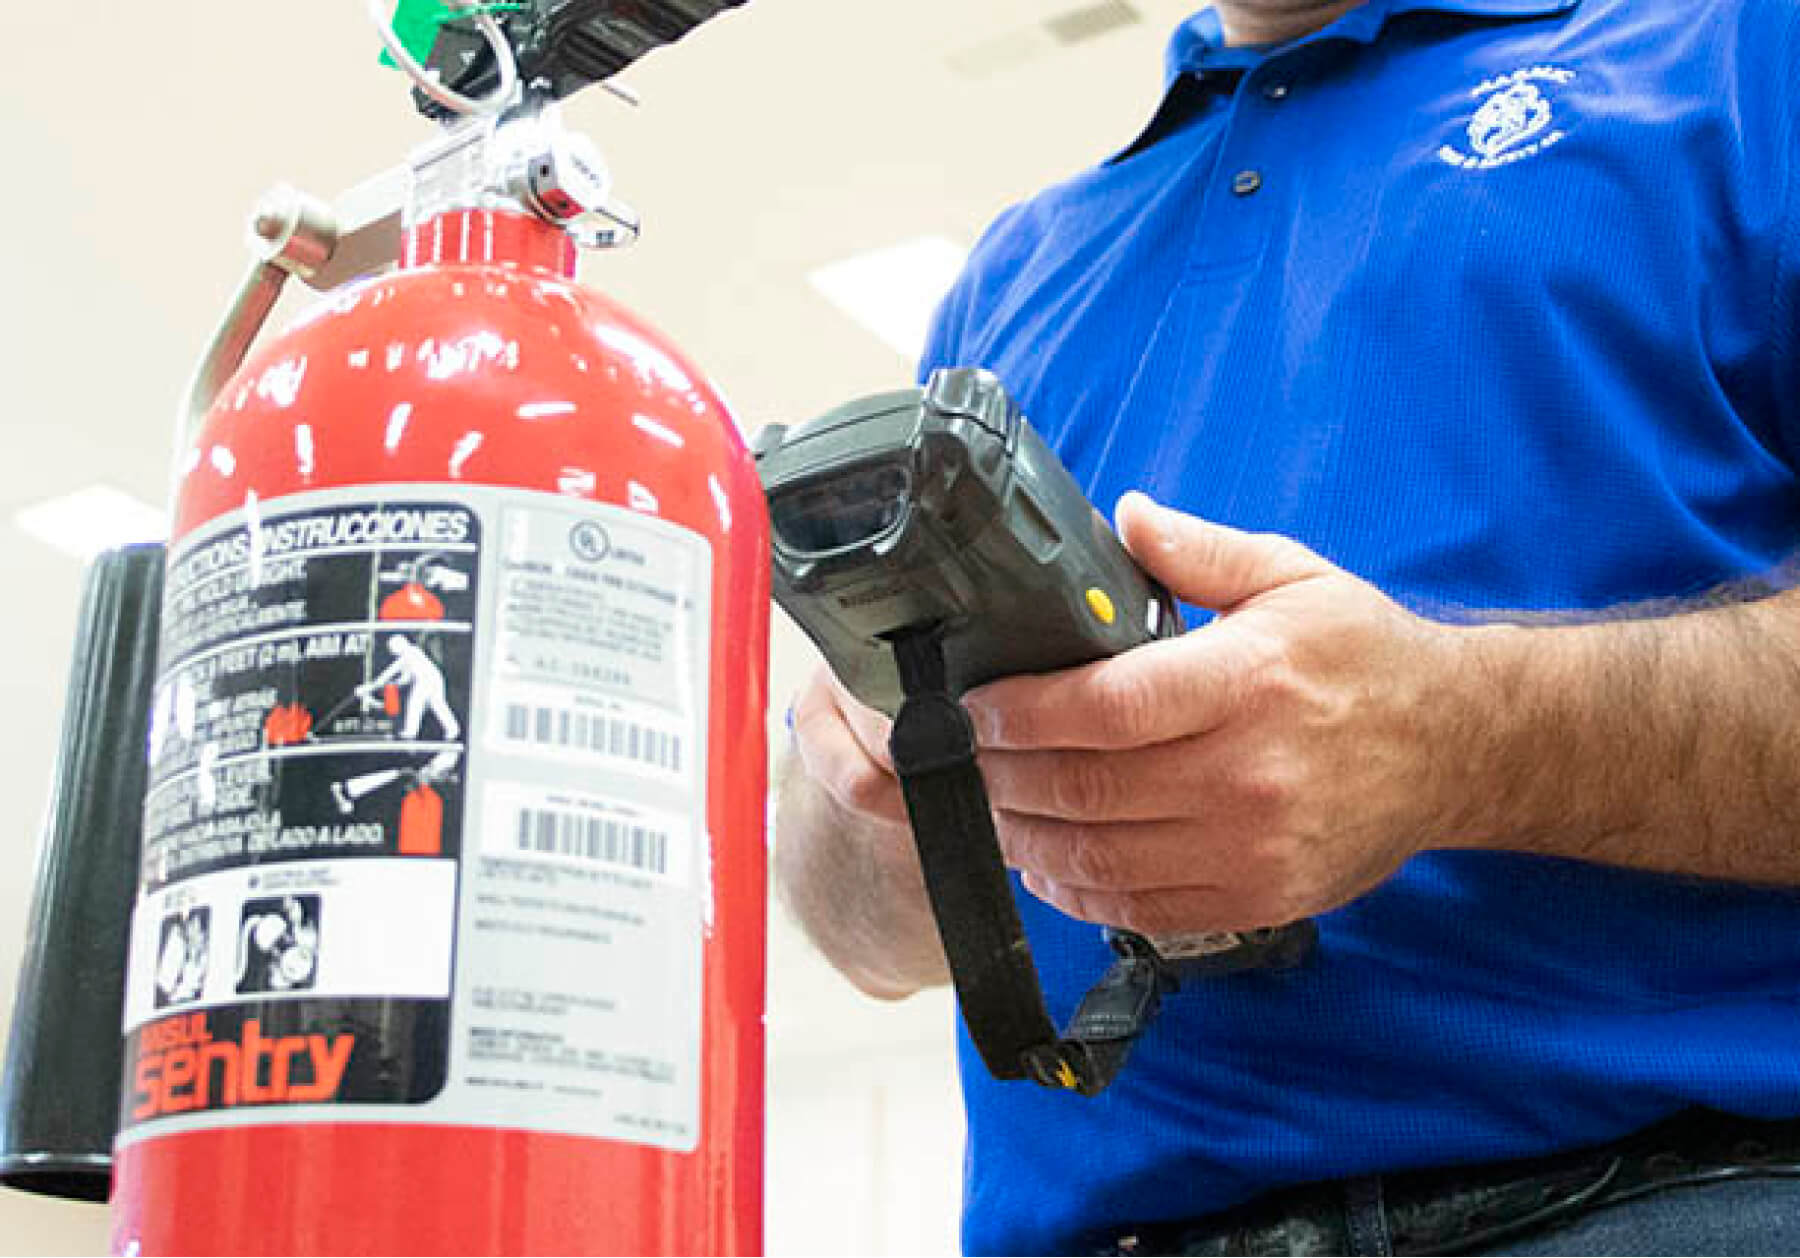 Marmic fire staffer examining a fire extinguisher